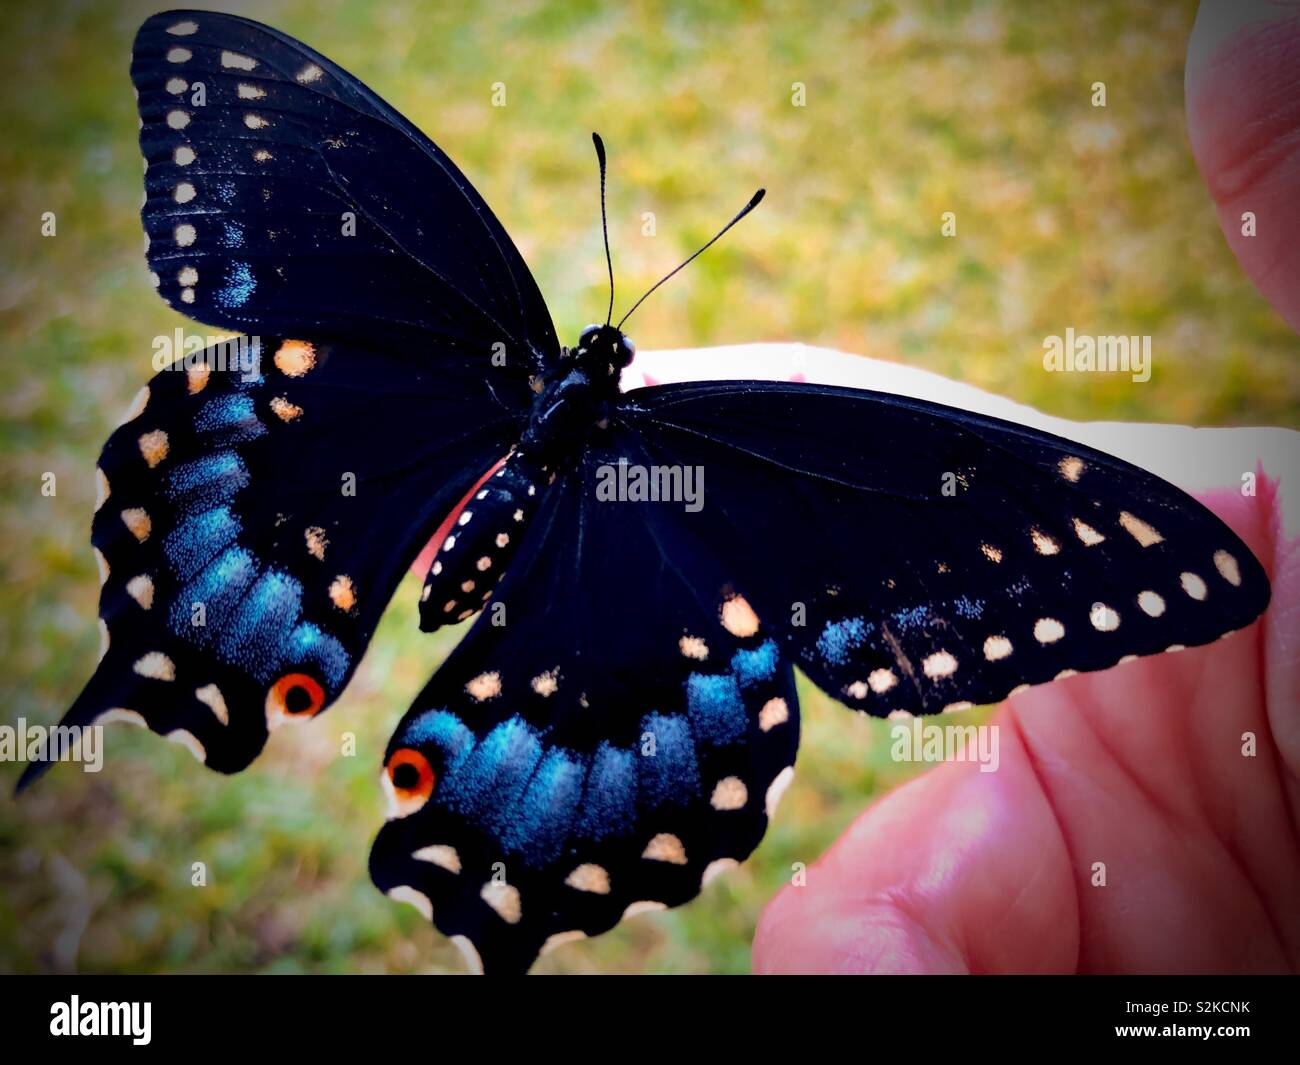 Female black swallowtail butterfly on a woman’s fingertip Stock Photo